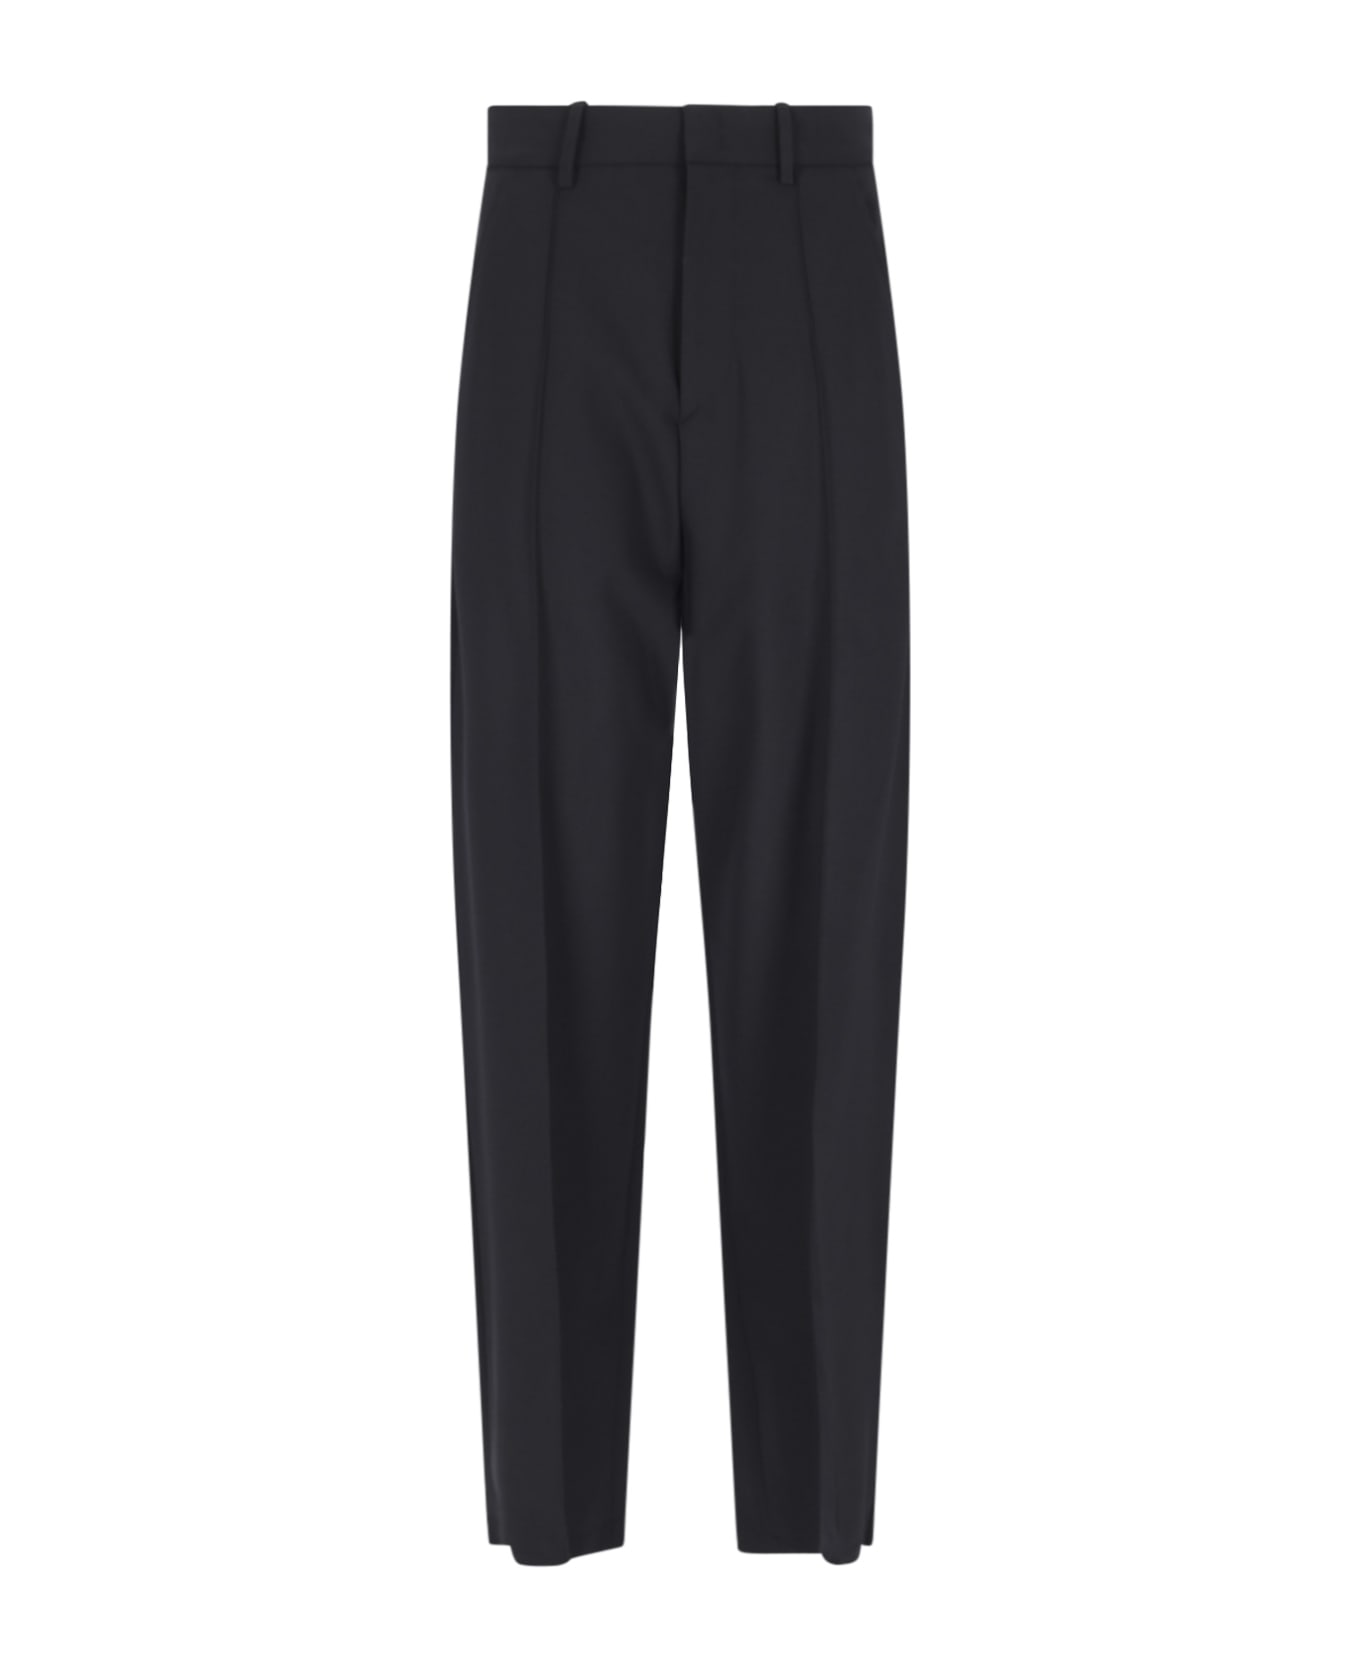 Isabel Marant Pleated Tailored Trousers - Black ボトムス